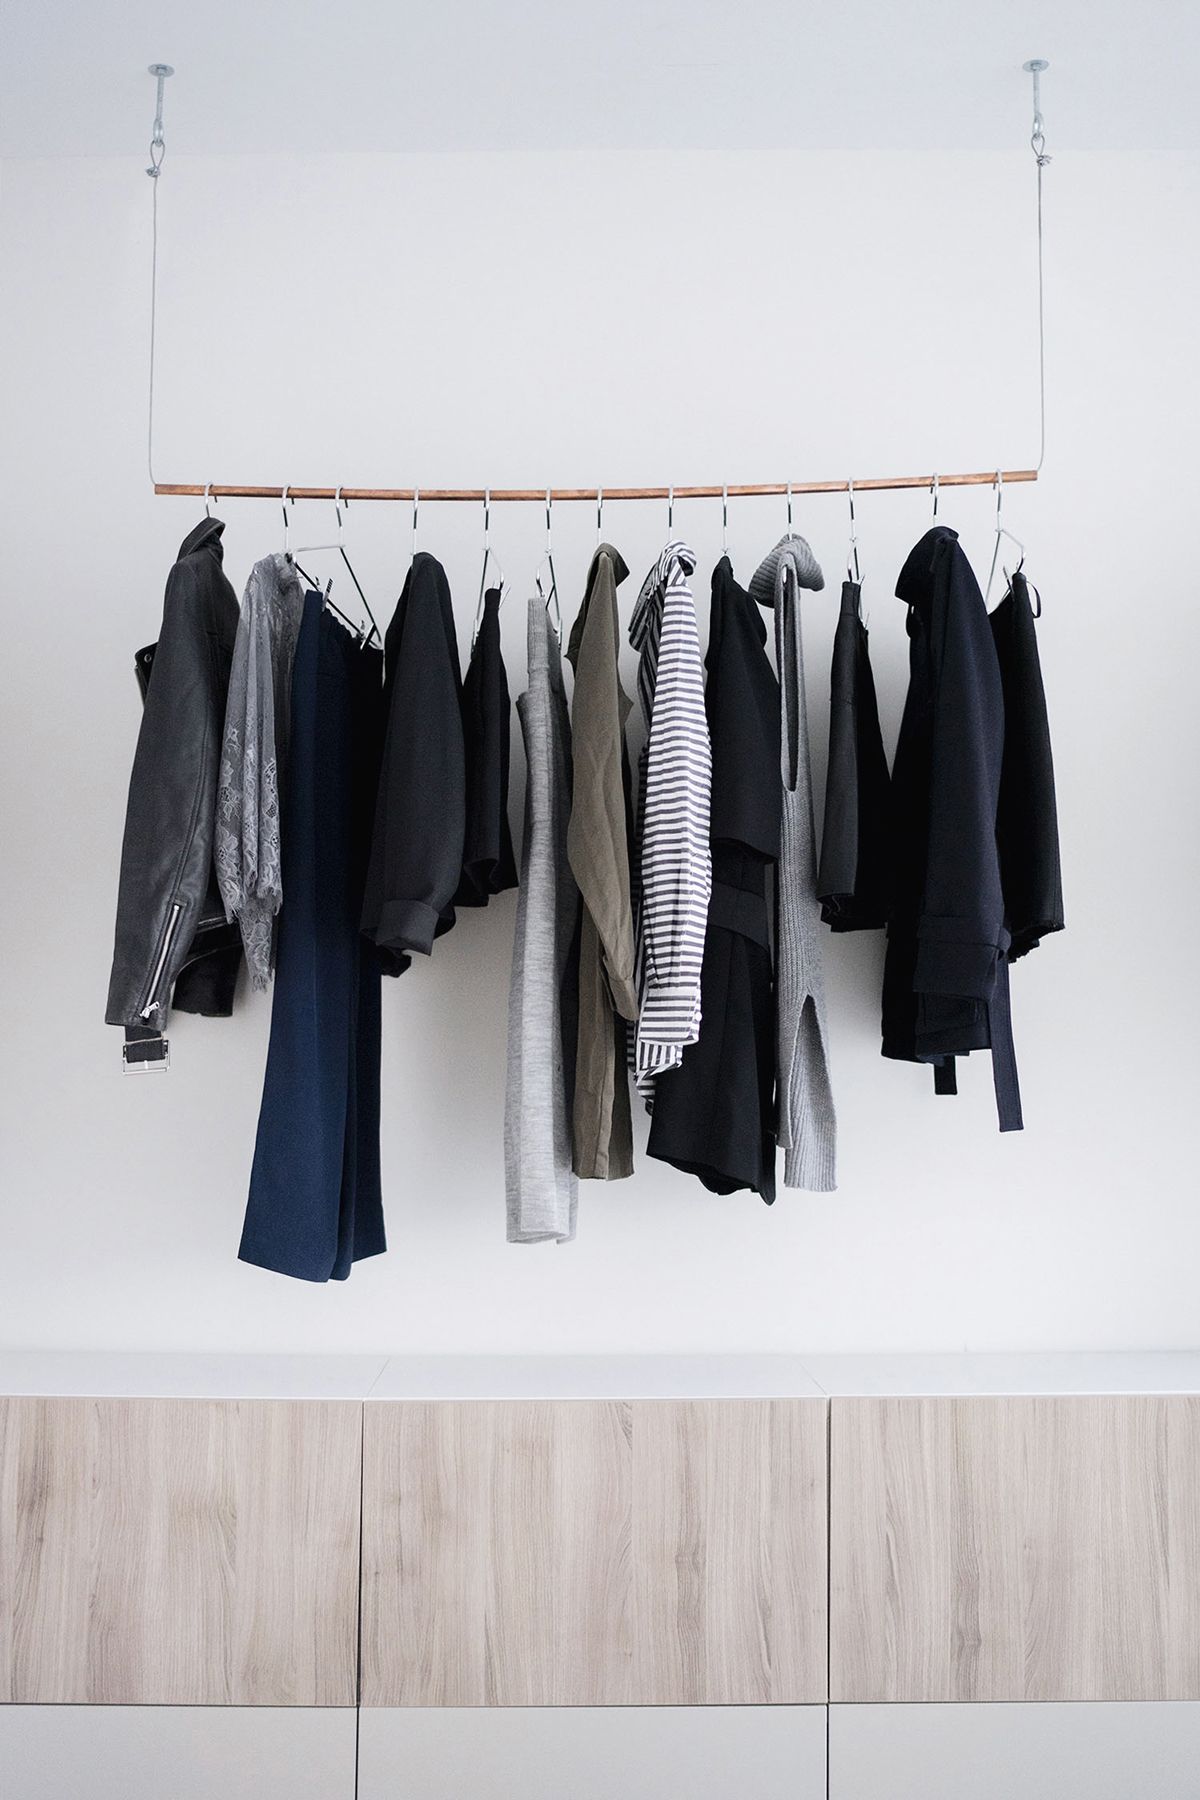 Wardrobe : Heavy Duty Hanging Clothes Rack Covered Laundry For Racks ...